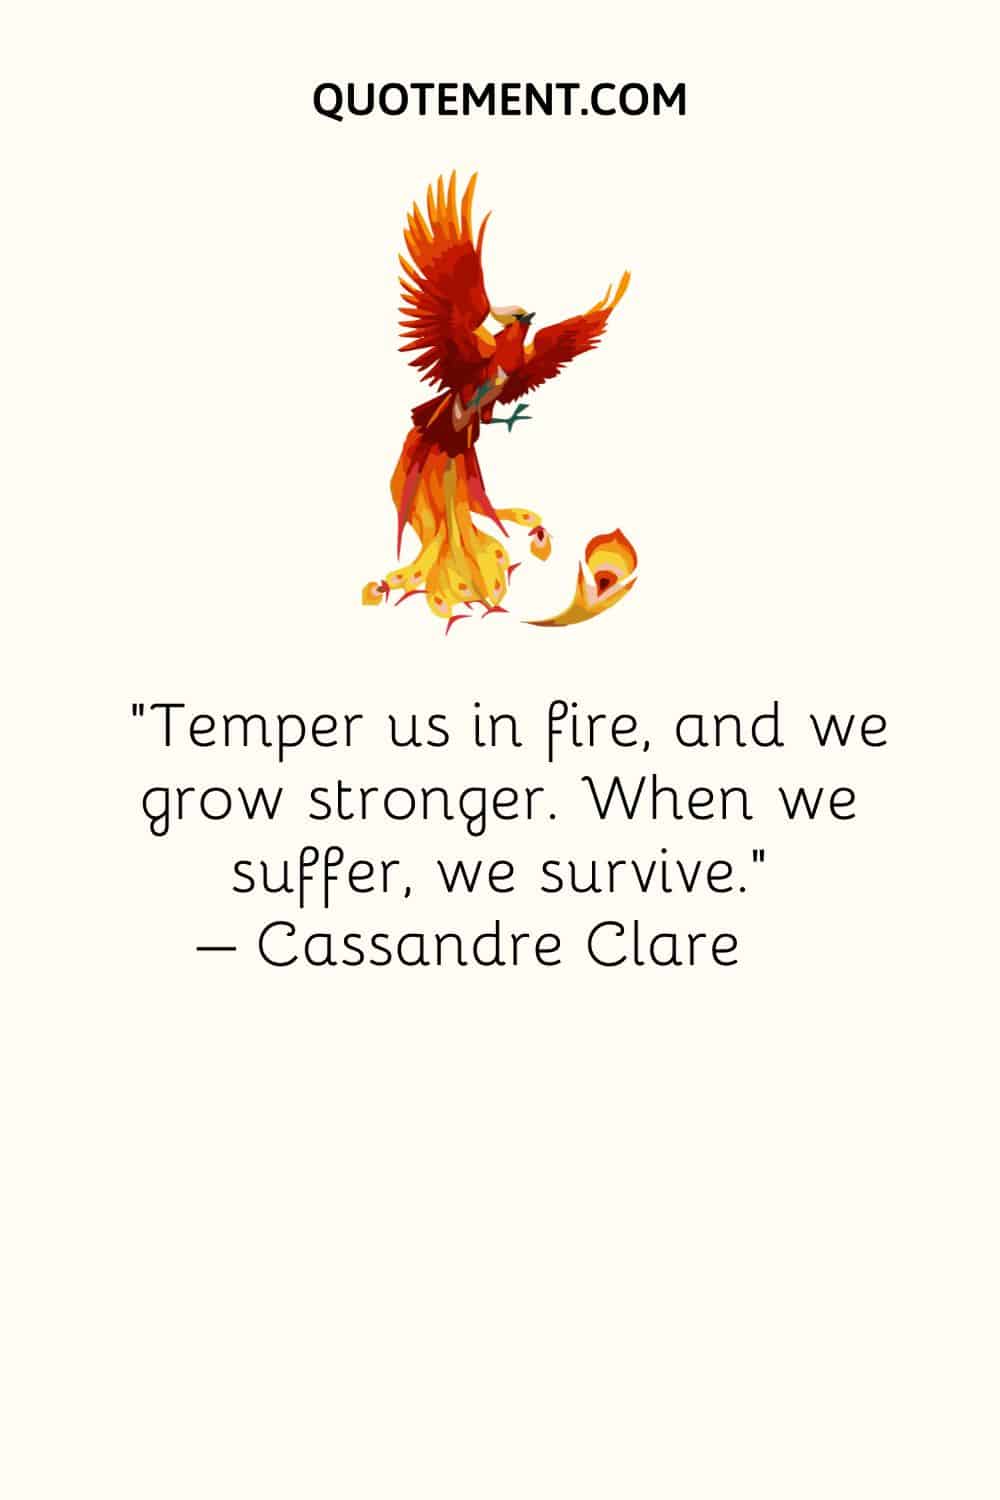 Temper us in fire, and we grow stronger. When we suffer, we survive